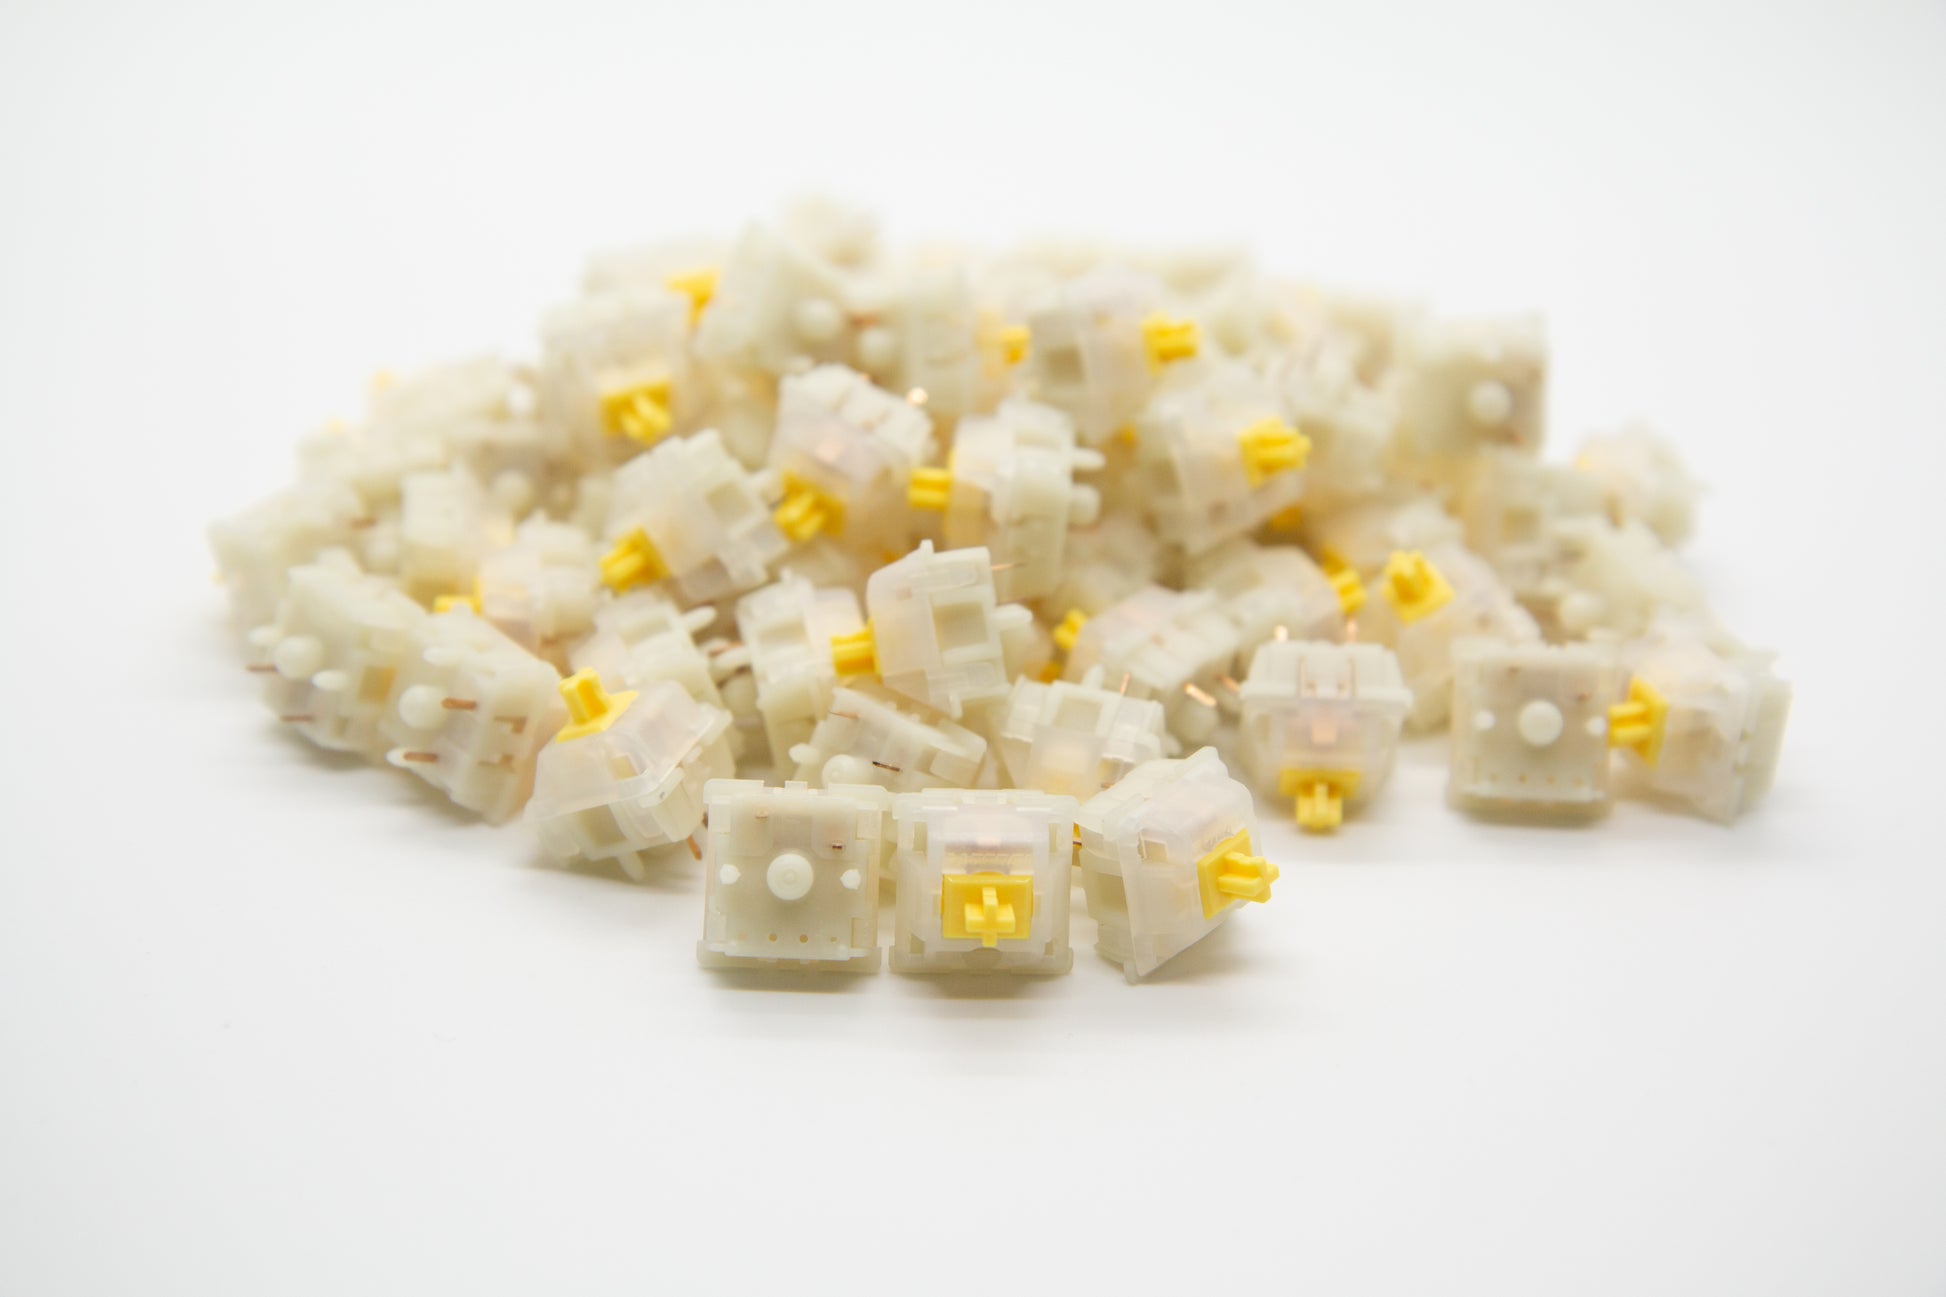 Close-up shot of a pile of Gateron Milky Yellow mechanical keyboard switches featuring white housing and yellow stems